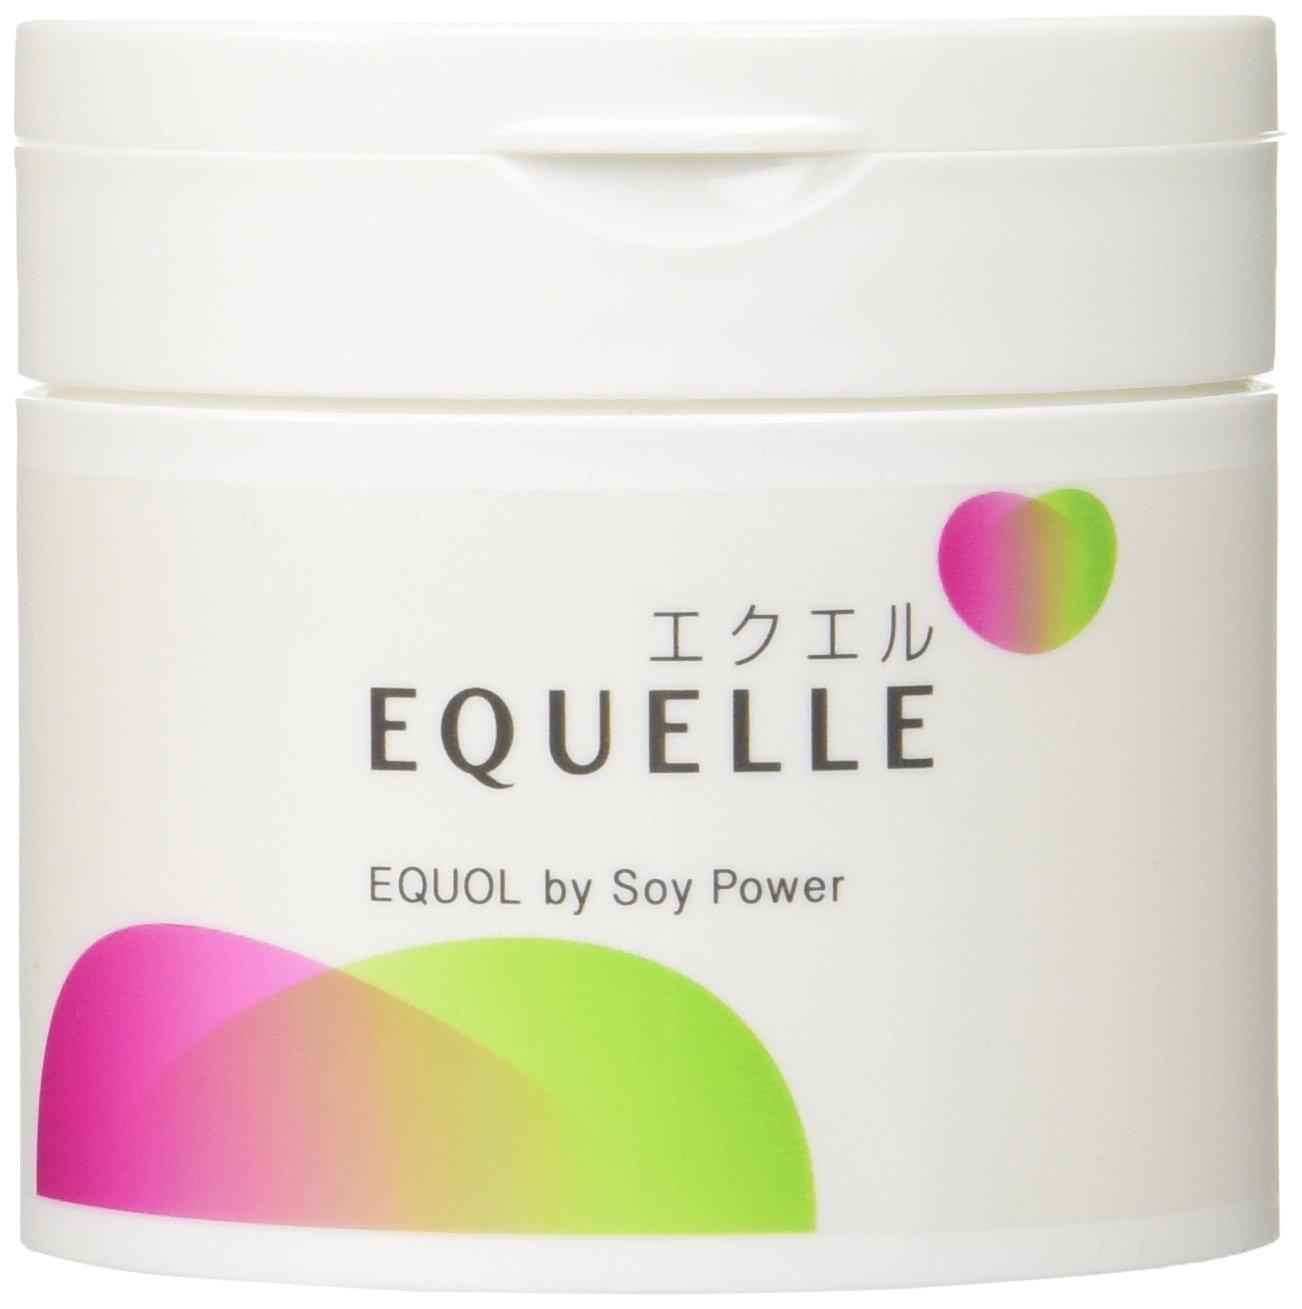 Otsuka EQUELLE equol is By Soy Power Complex for women in menopause, 112шт